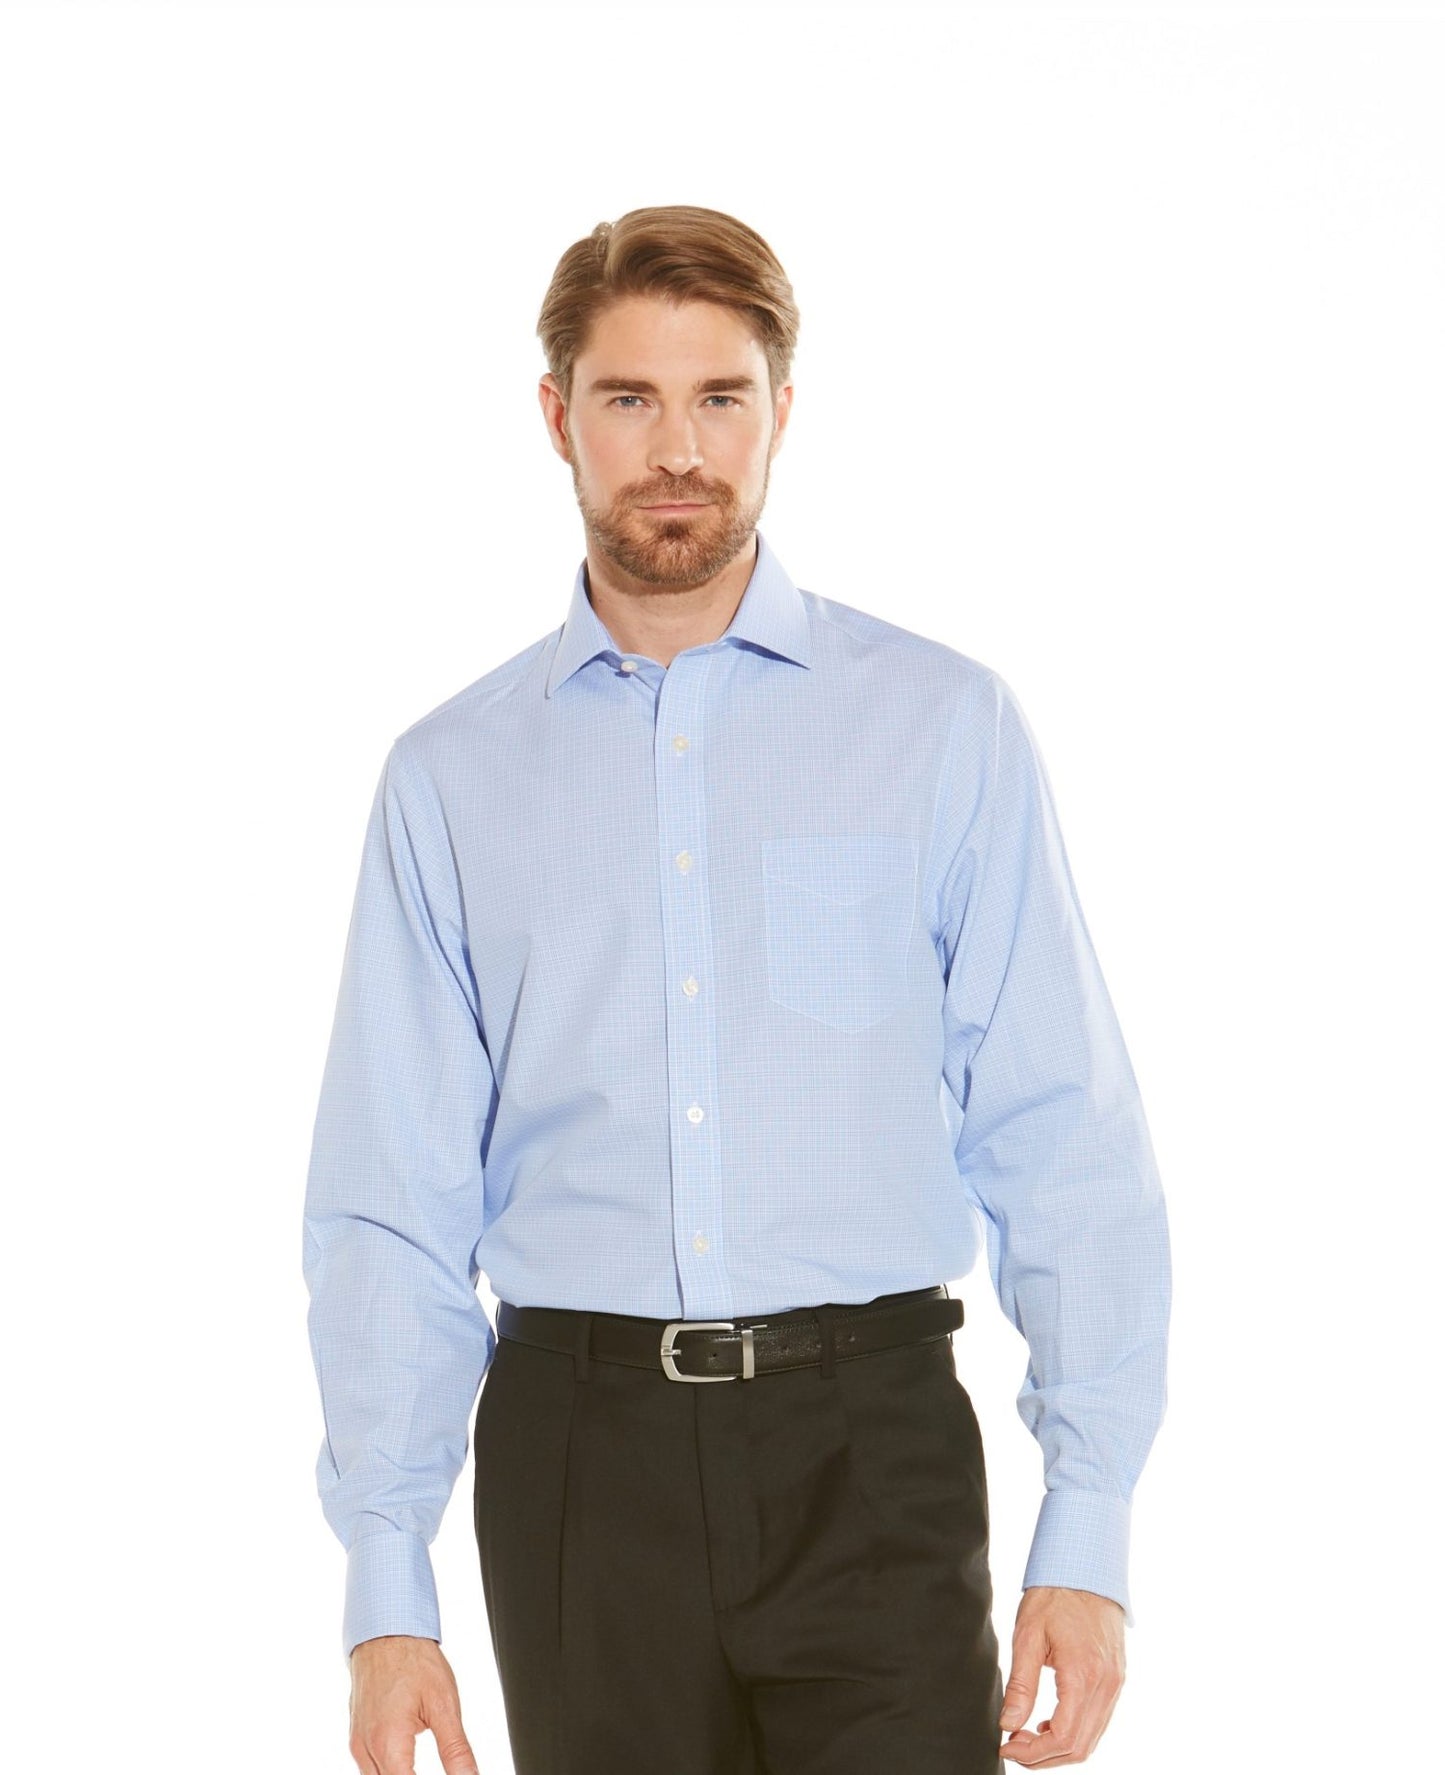 NON-IRON BLUE SMALL PRINCE OF WALES CHECK CLASSIC FIT SHIRT – SINGLE CUFF